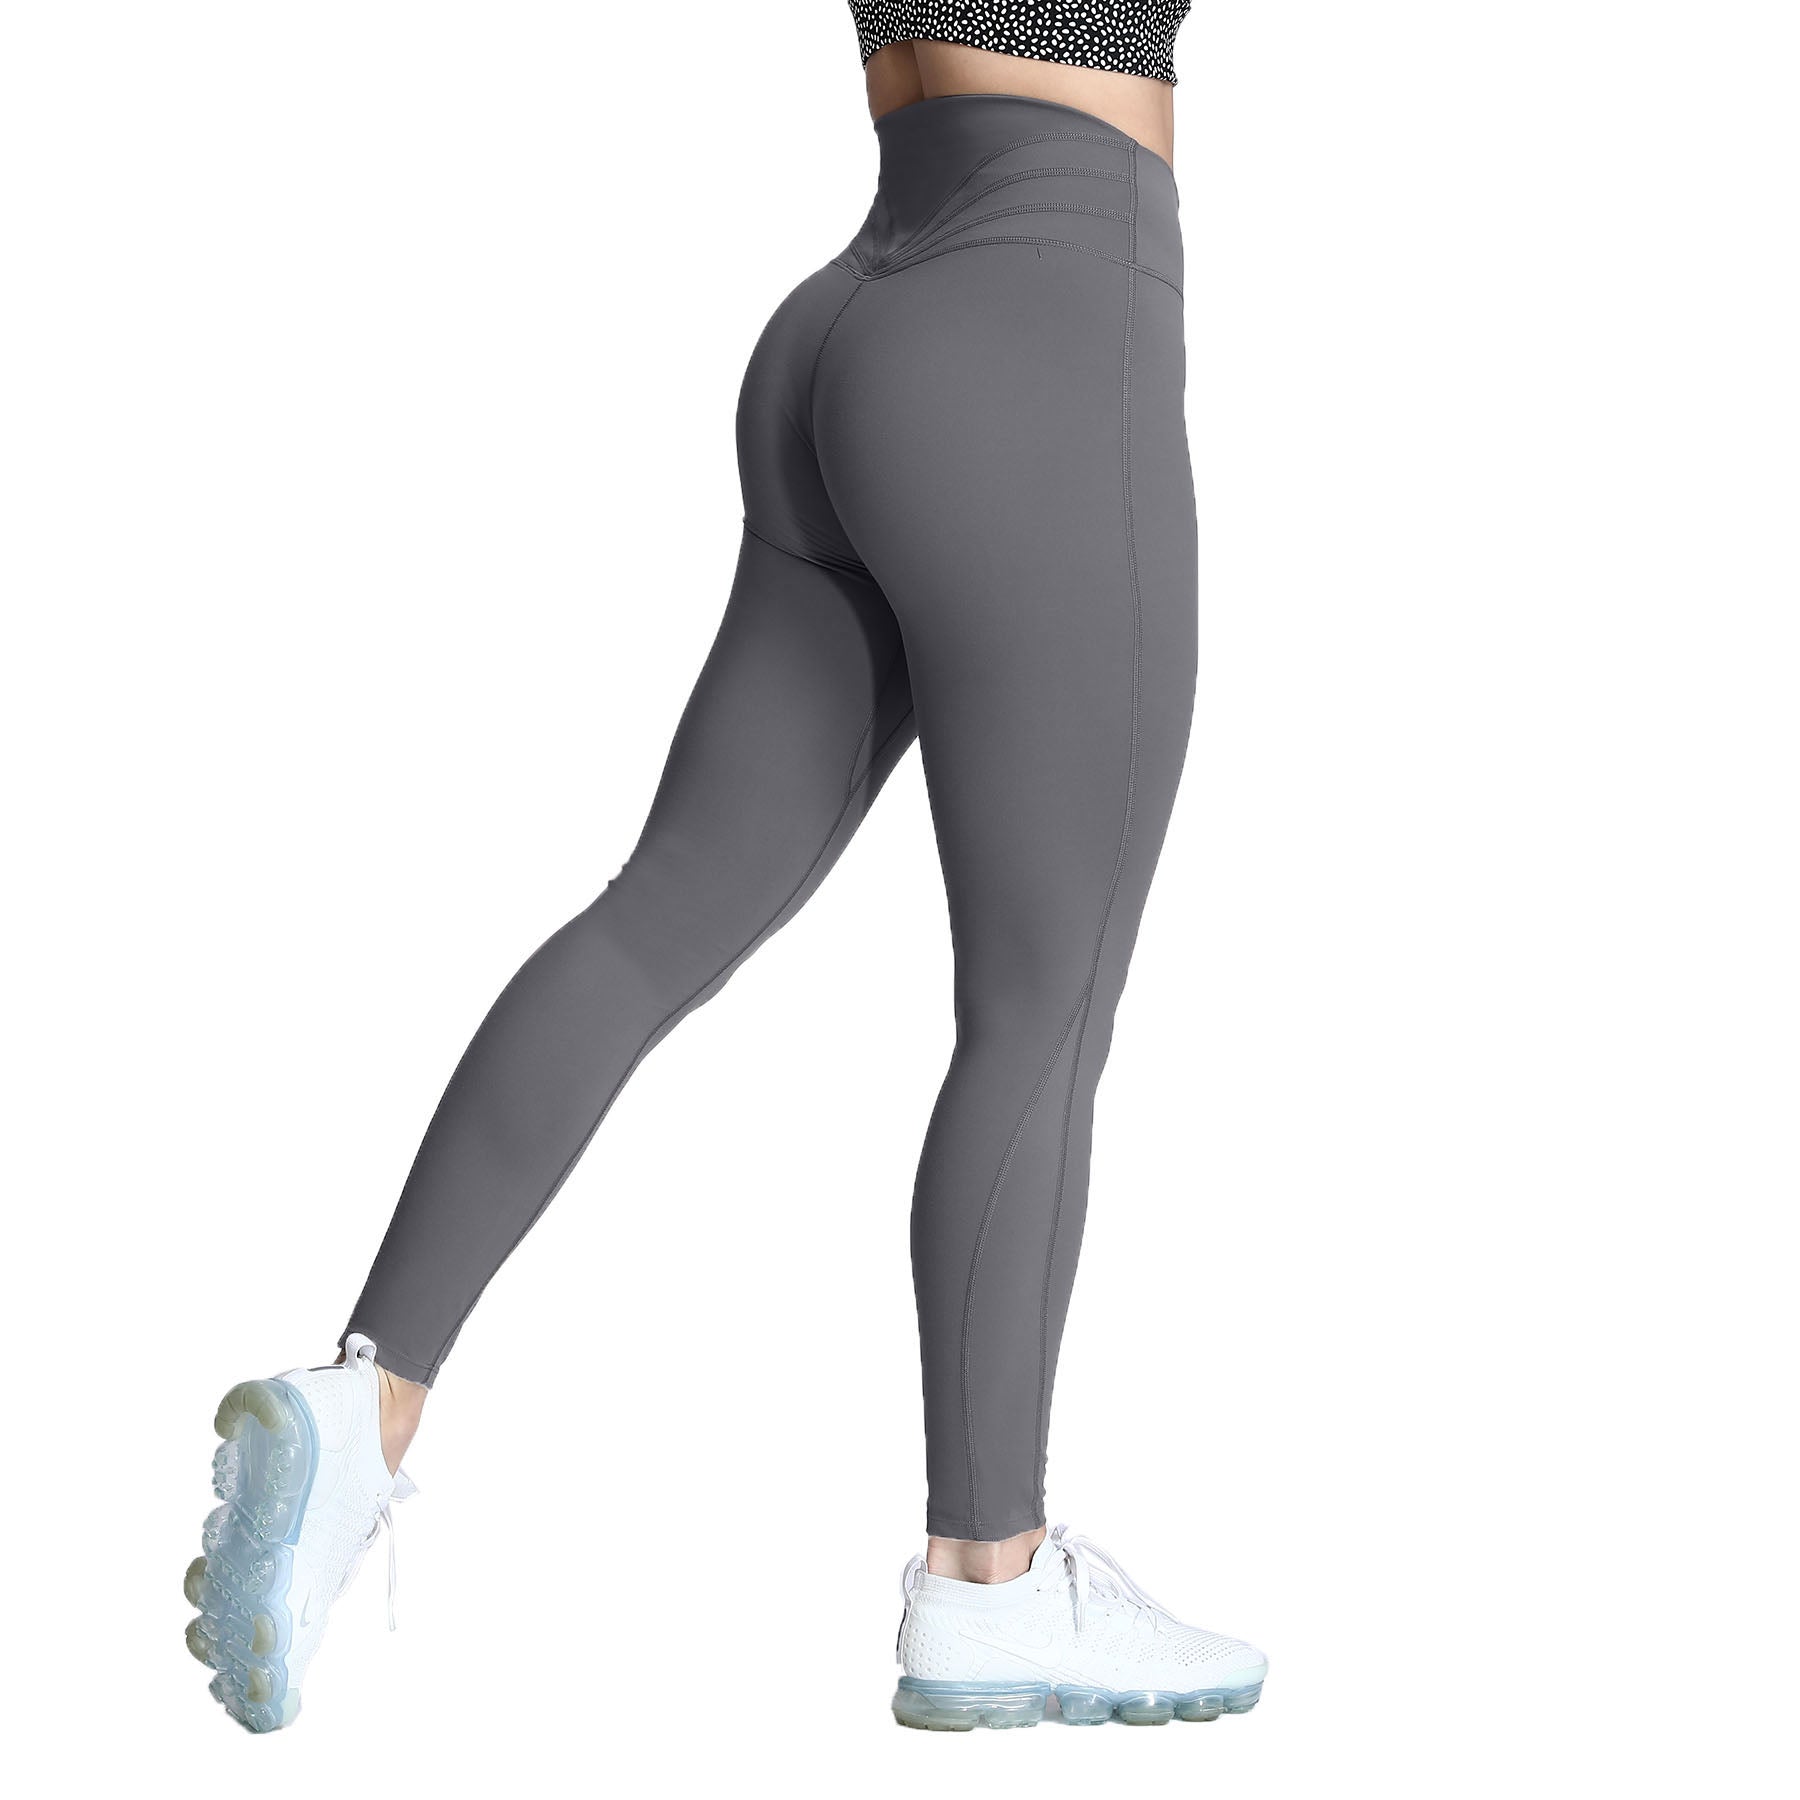 Aoxjox High Waisted Workout Leggings for Women Palestine